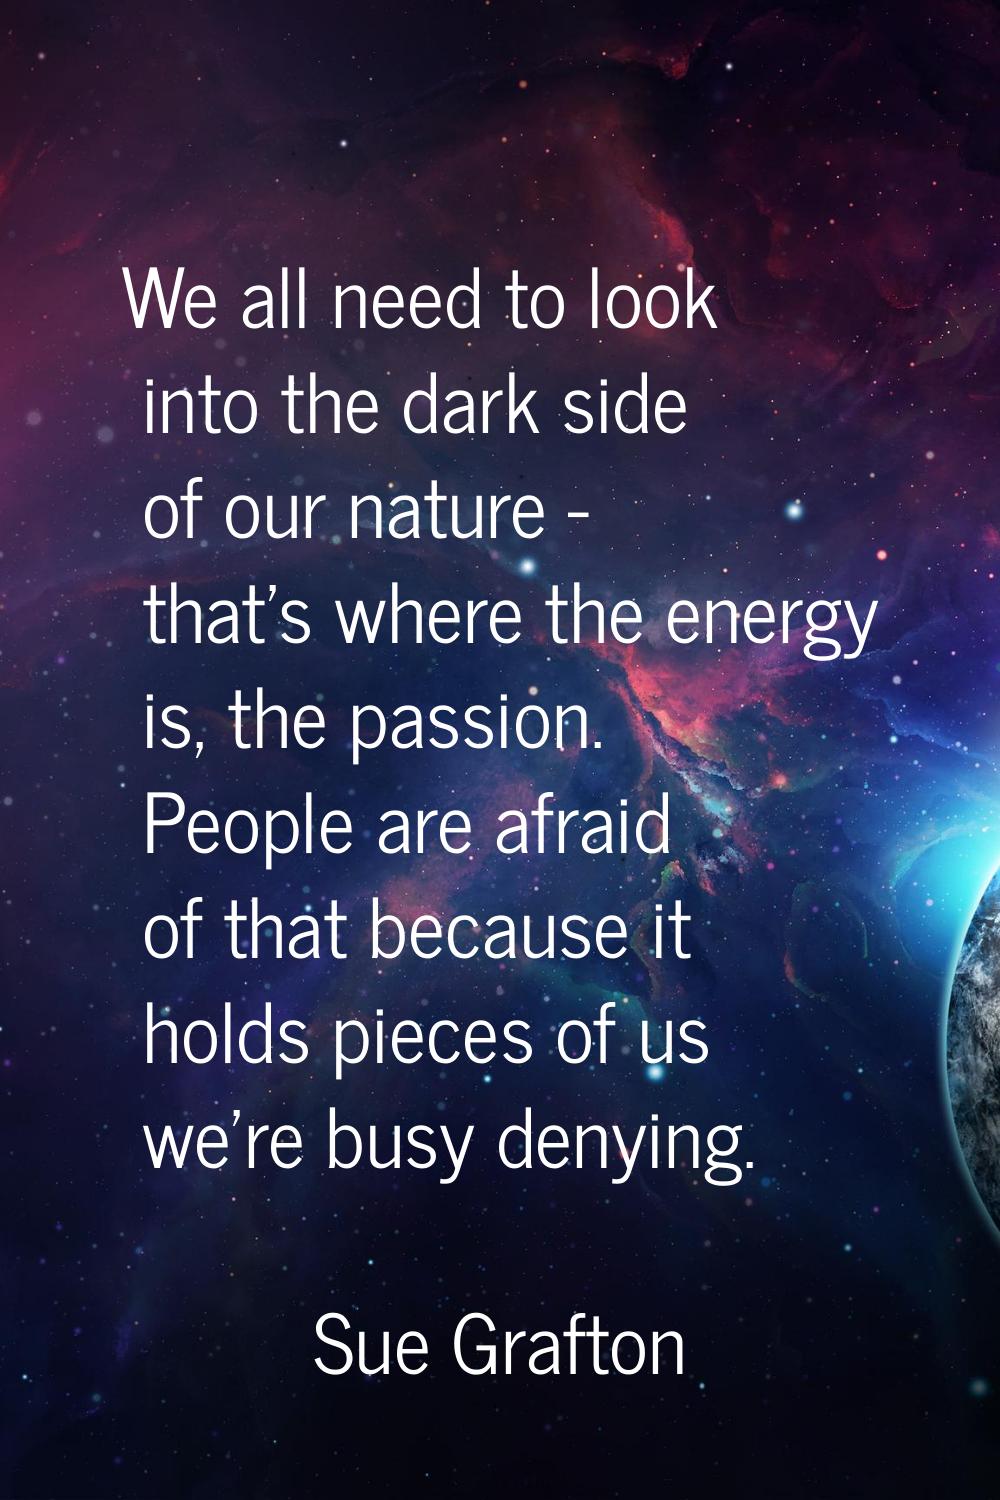 We all need to look into the dark side of our nature - that's where the energy is, the passion. Peo